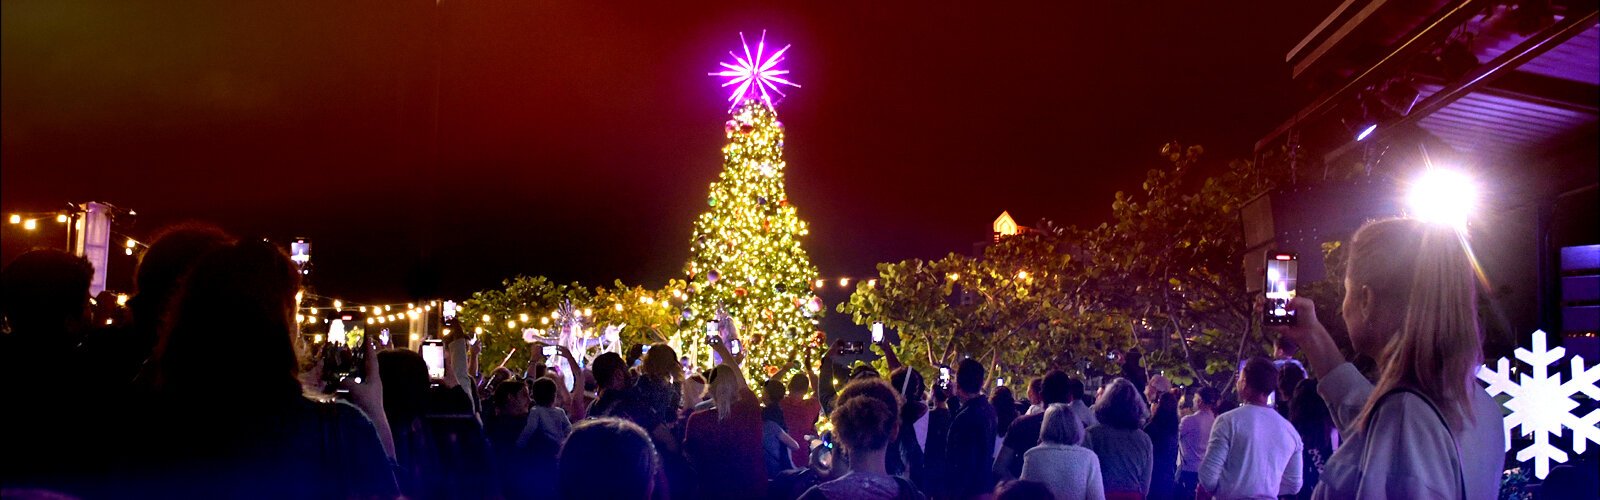 Visitors enjoy the lighting of the 35-foot Christmas tree on the Sparkman Wharf lawn to kick off the holiday season.